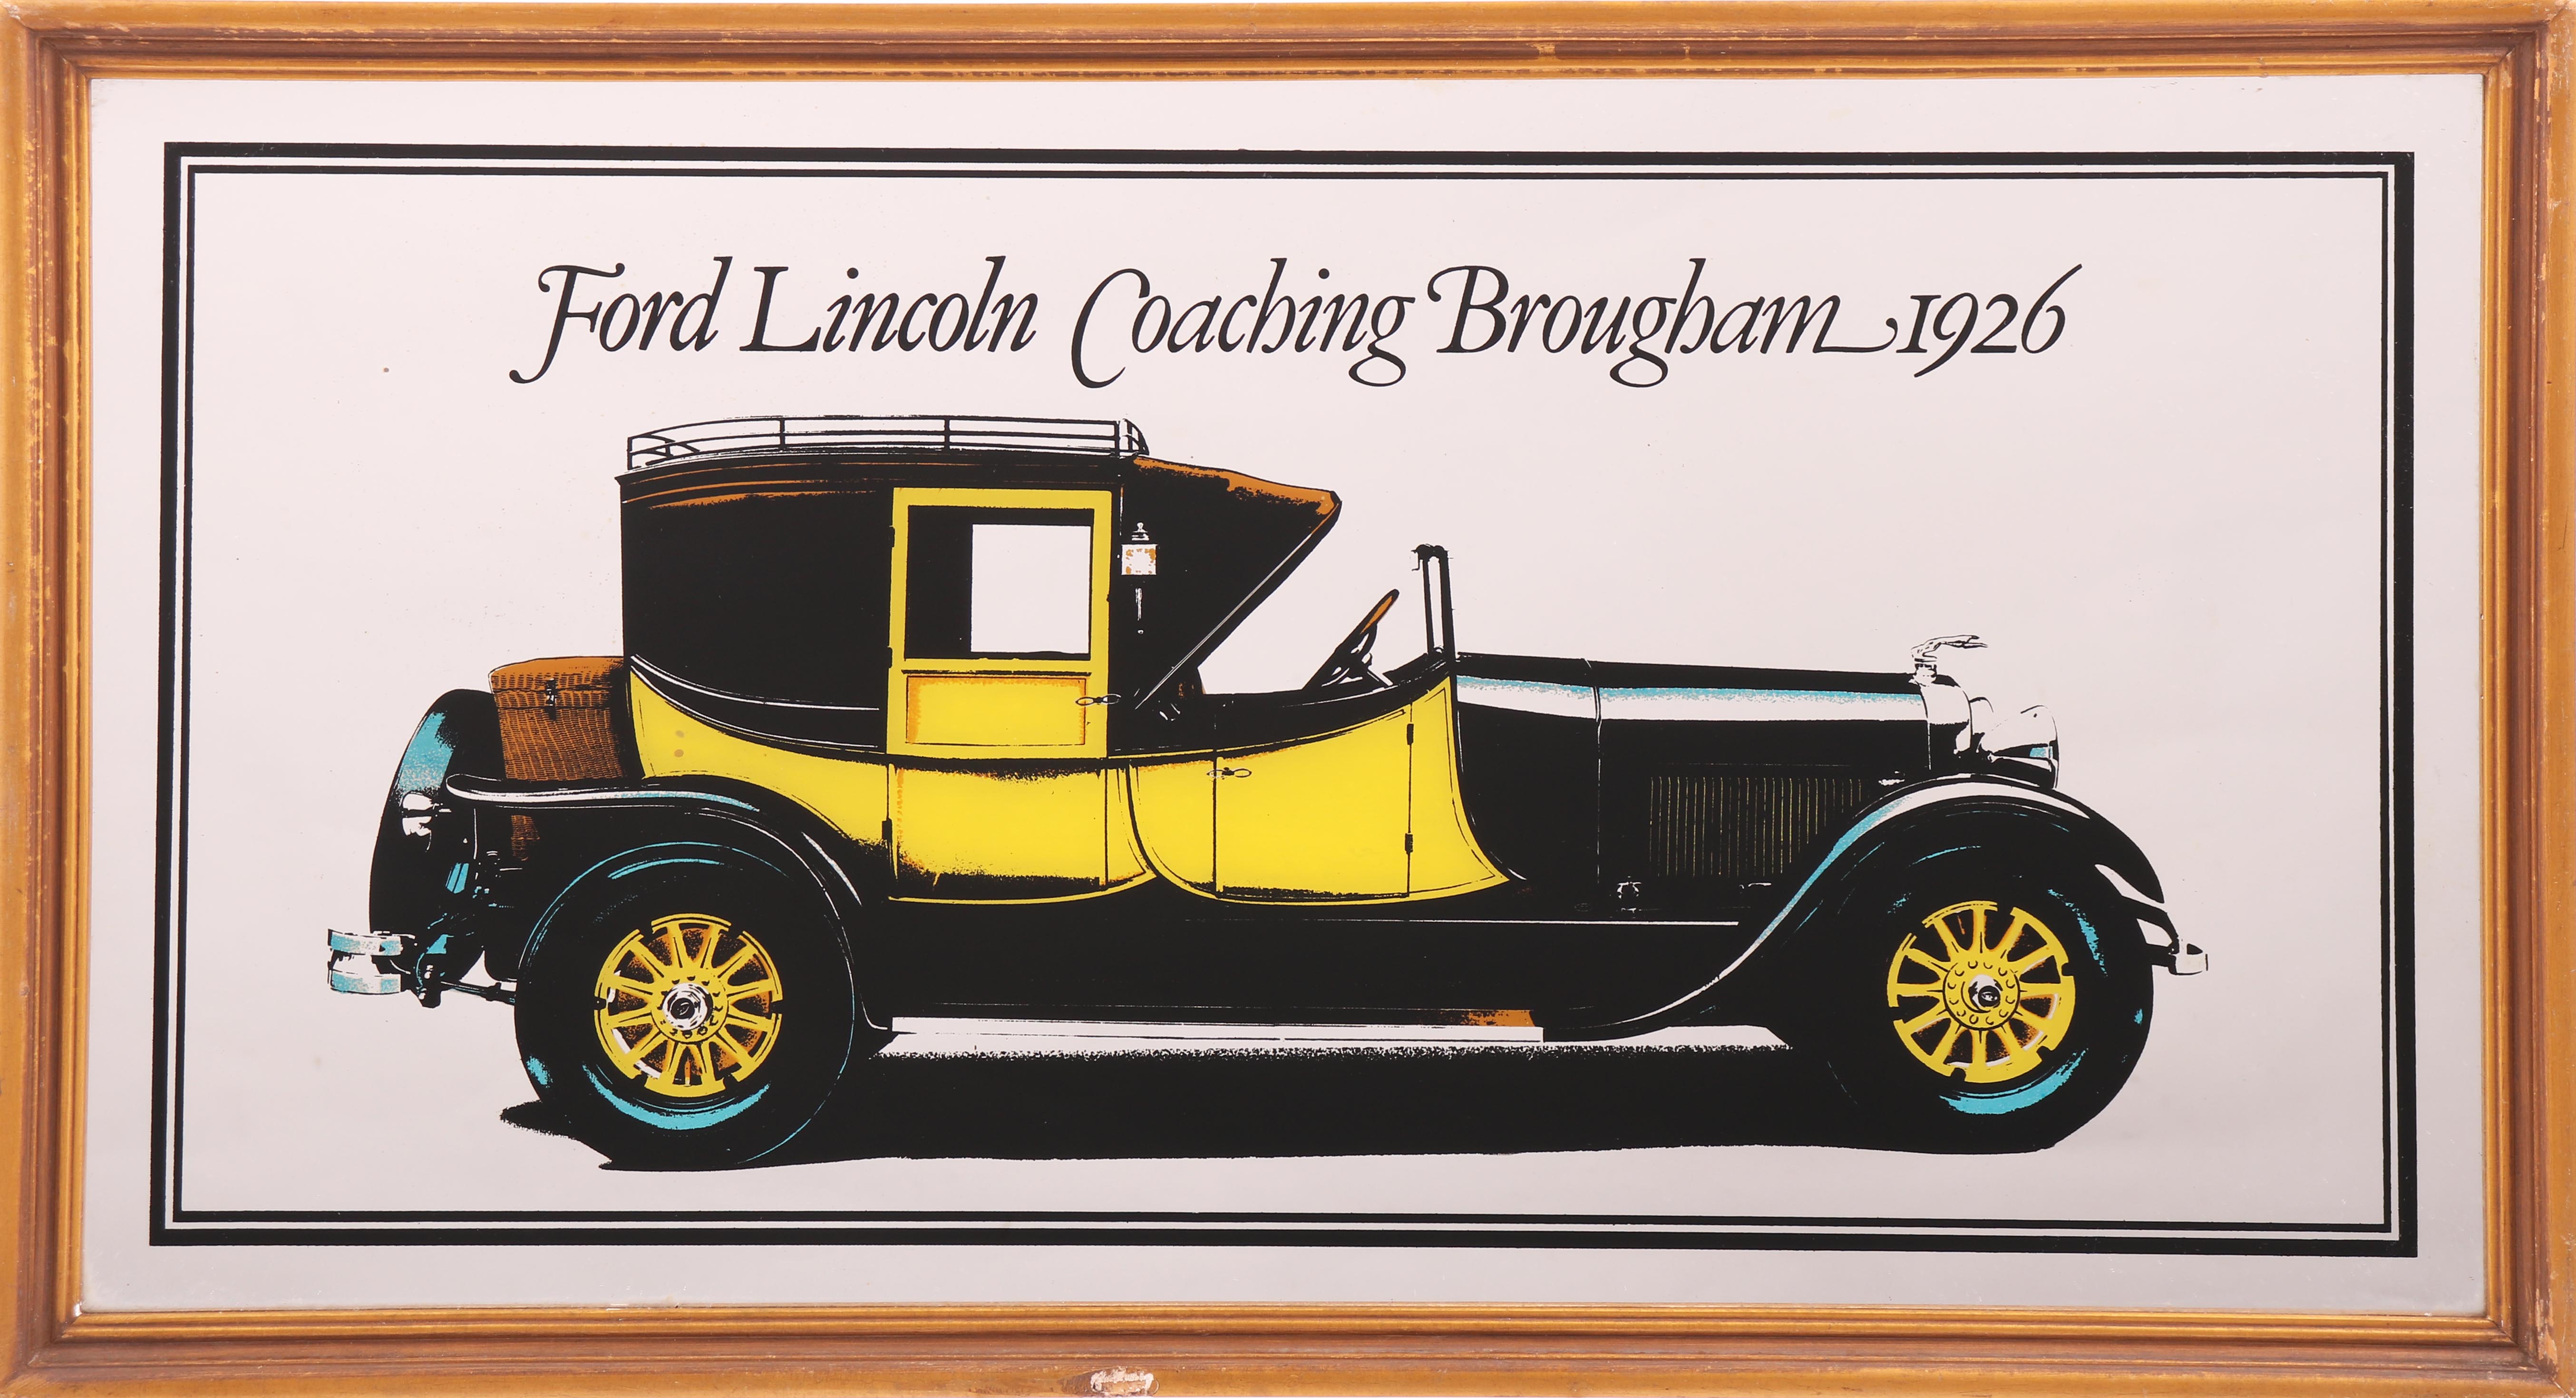 Ford Lincoln Coaching Brougham 1926